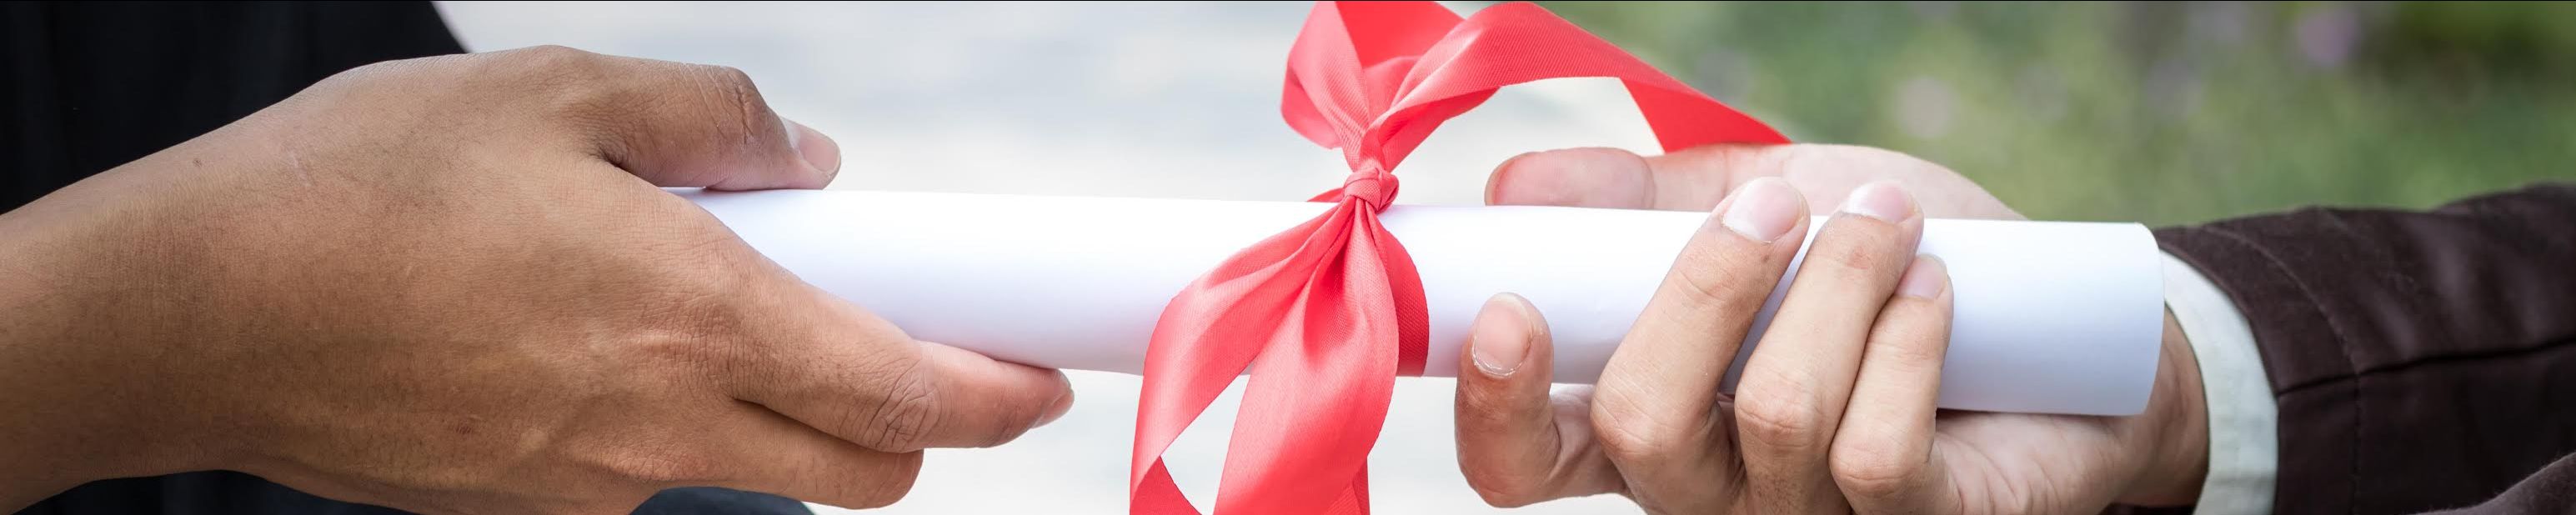 Two hands holding a diploma wrapped in a red ribbon